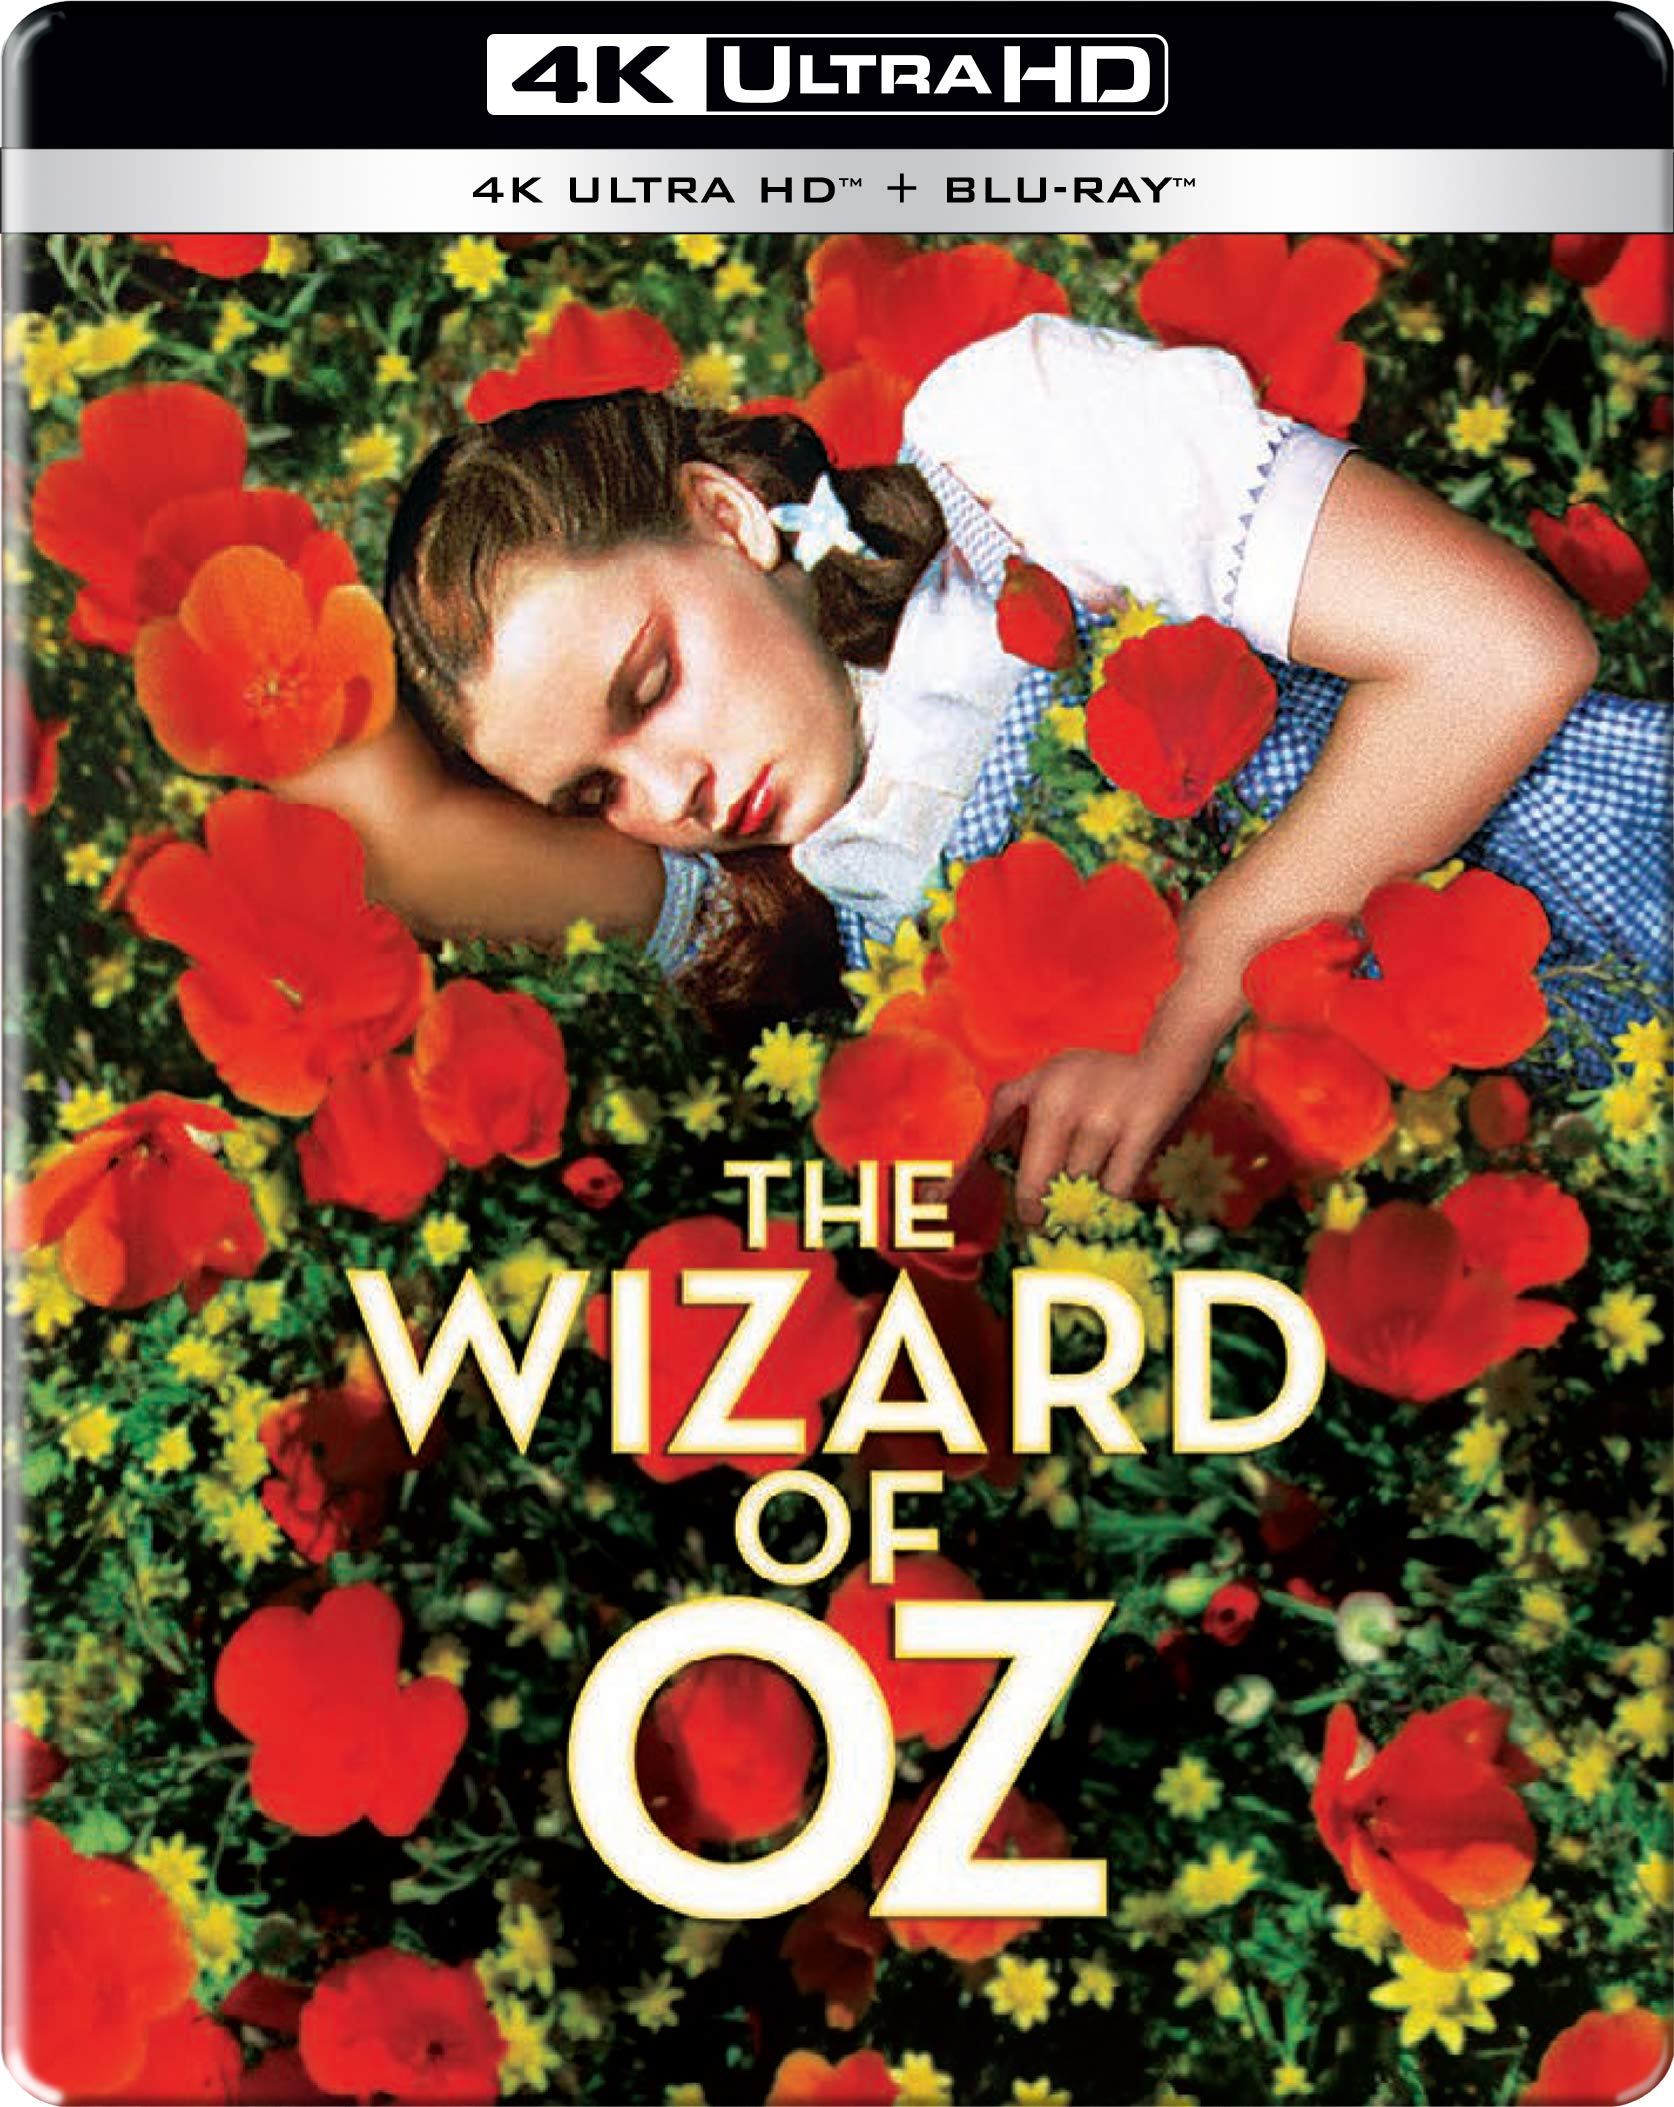 the-wizard-of-oz-steelbook-4k-uhd-hd-2-disc-movie-purchase-or